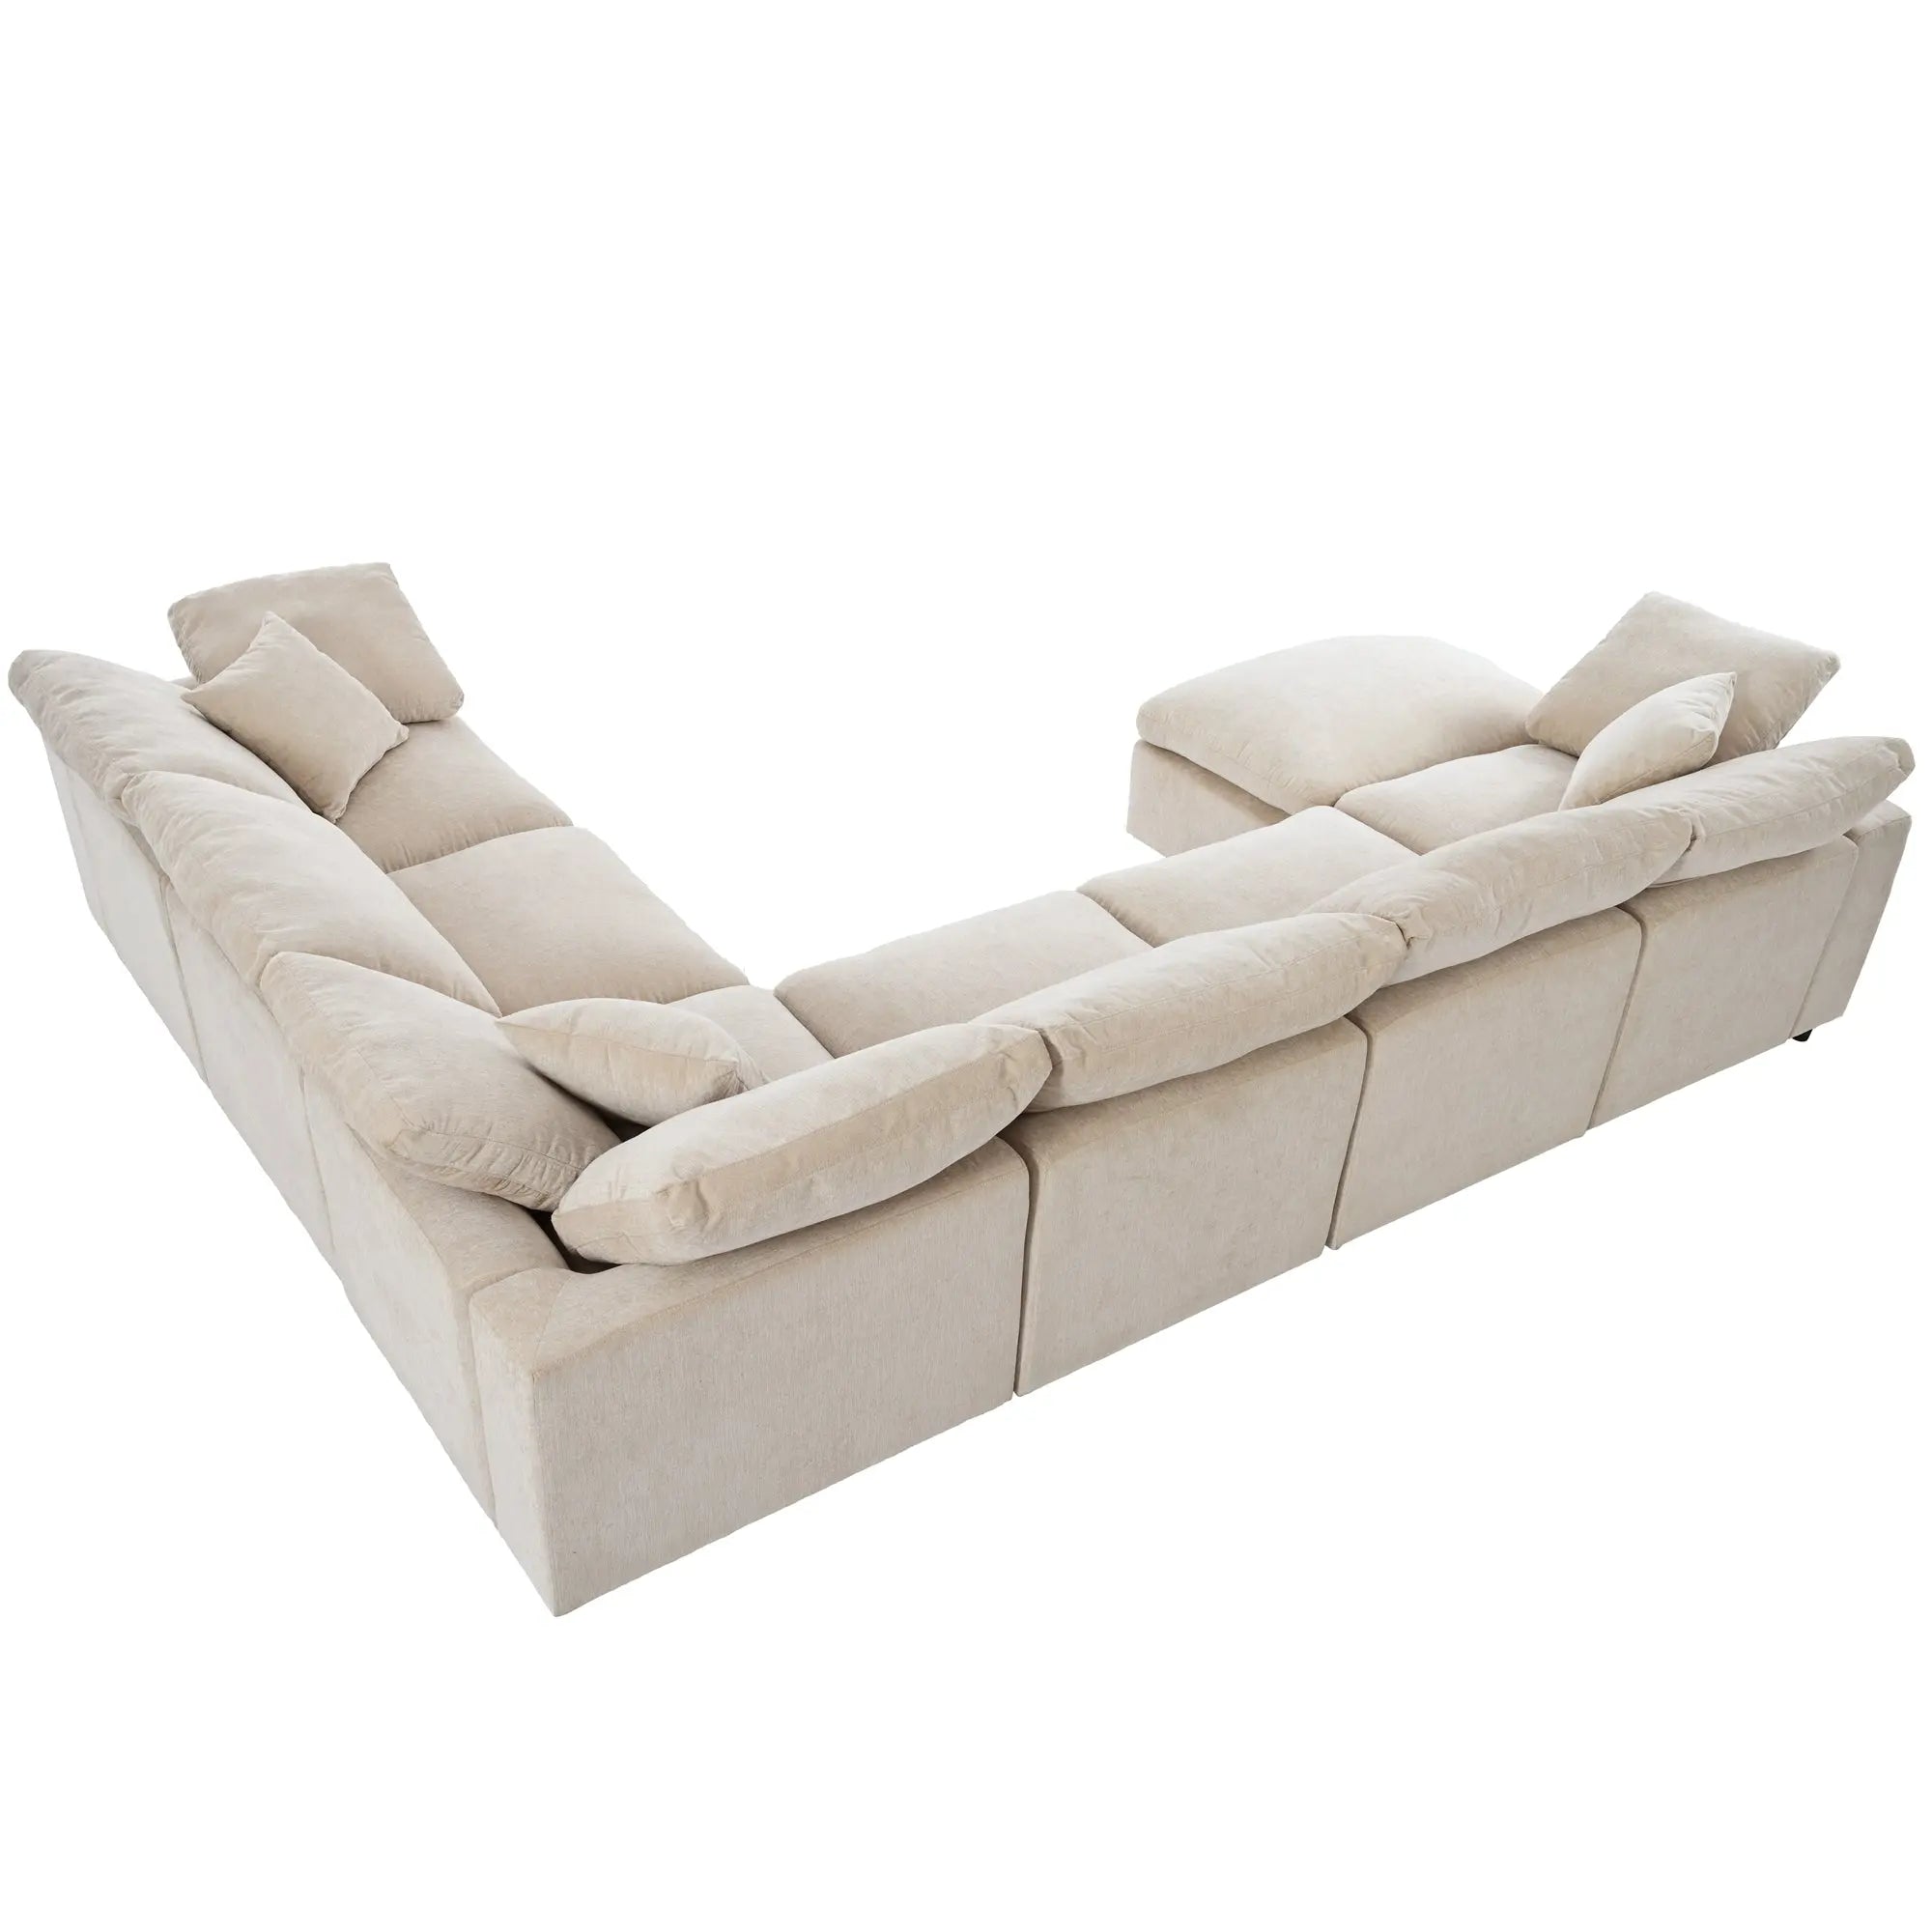 Bellemave 129.3" Oversized Modular Sectional Sofa with Ottoman L Shaped Corner Sectional Bellemave